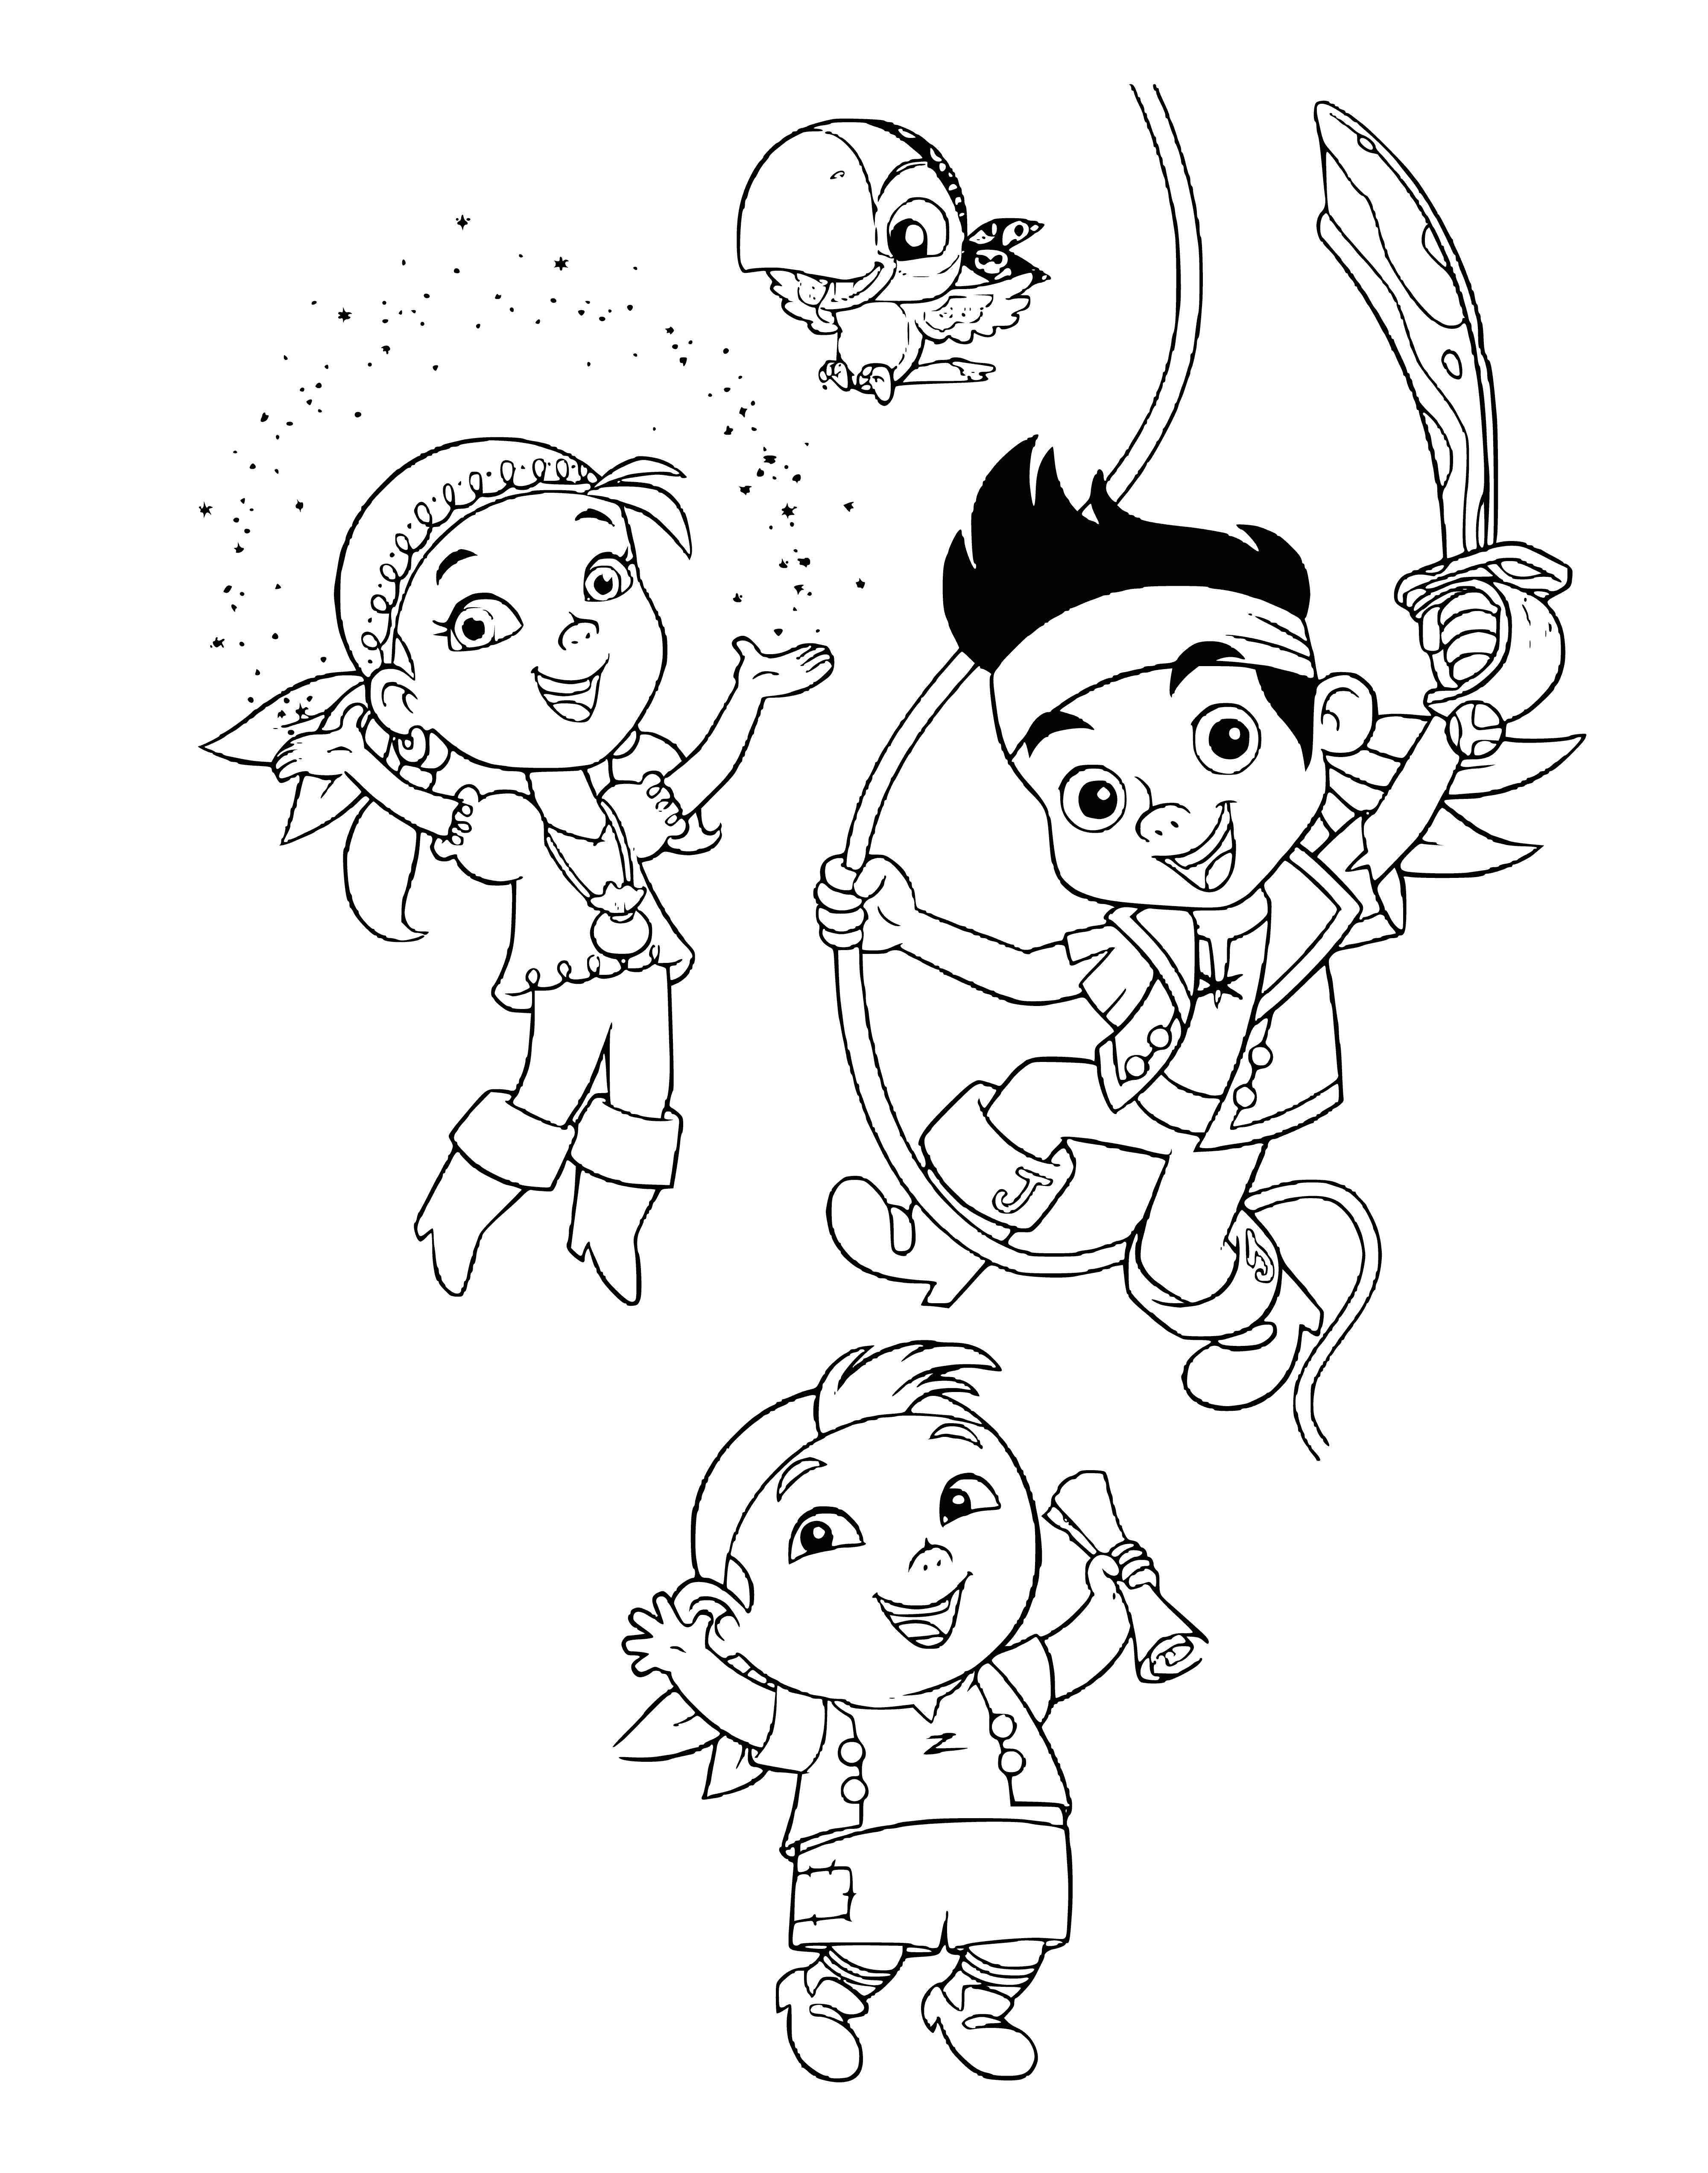 Fairy dust, saber and map coloring page